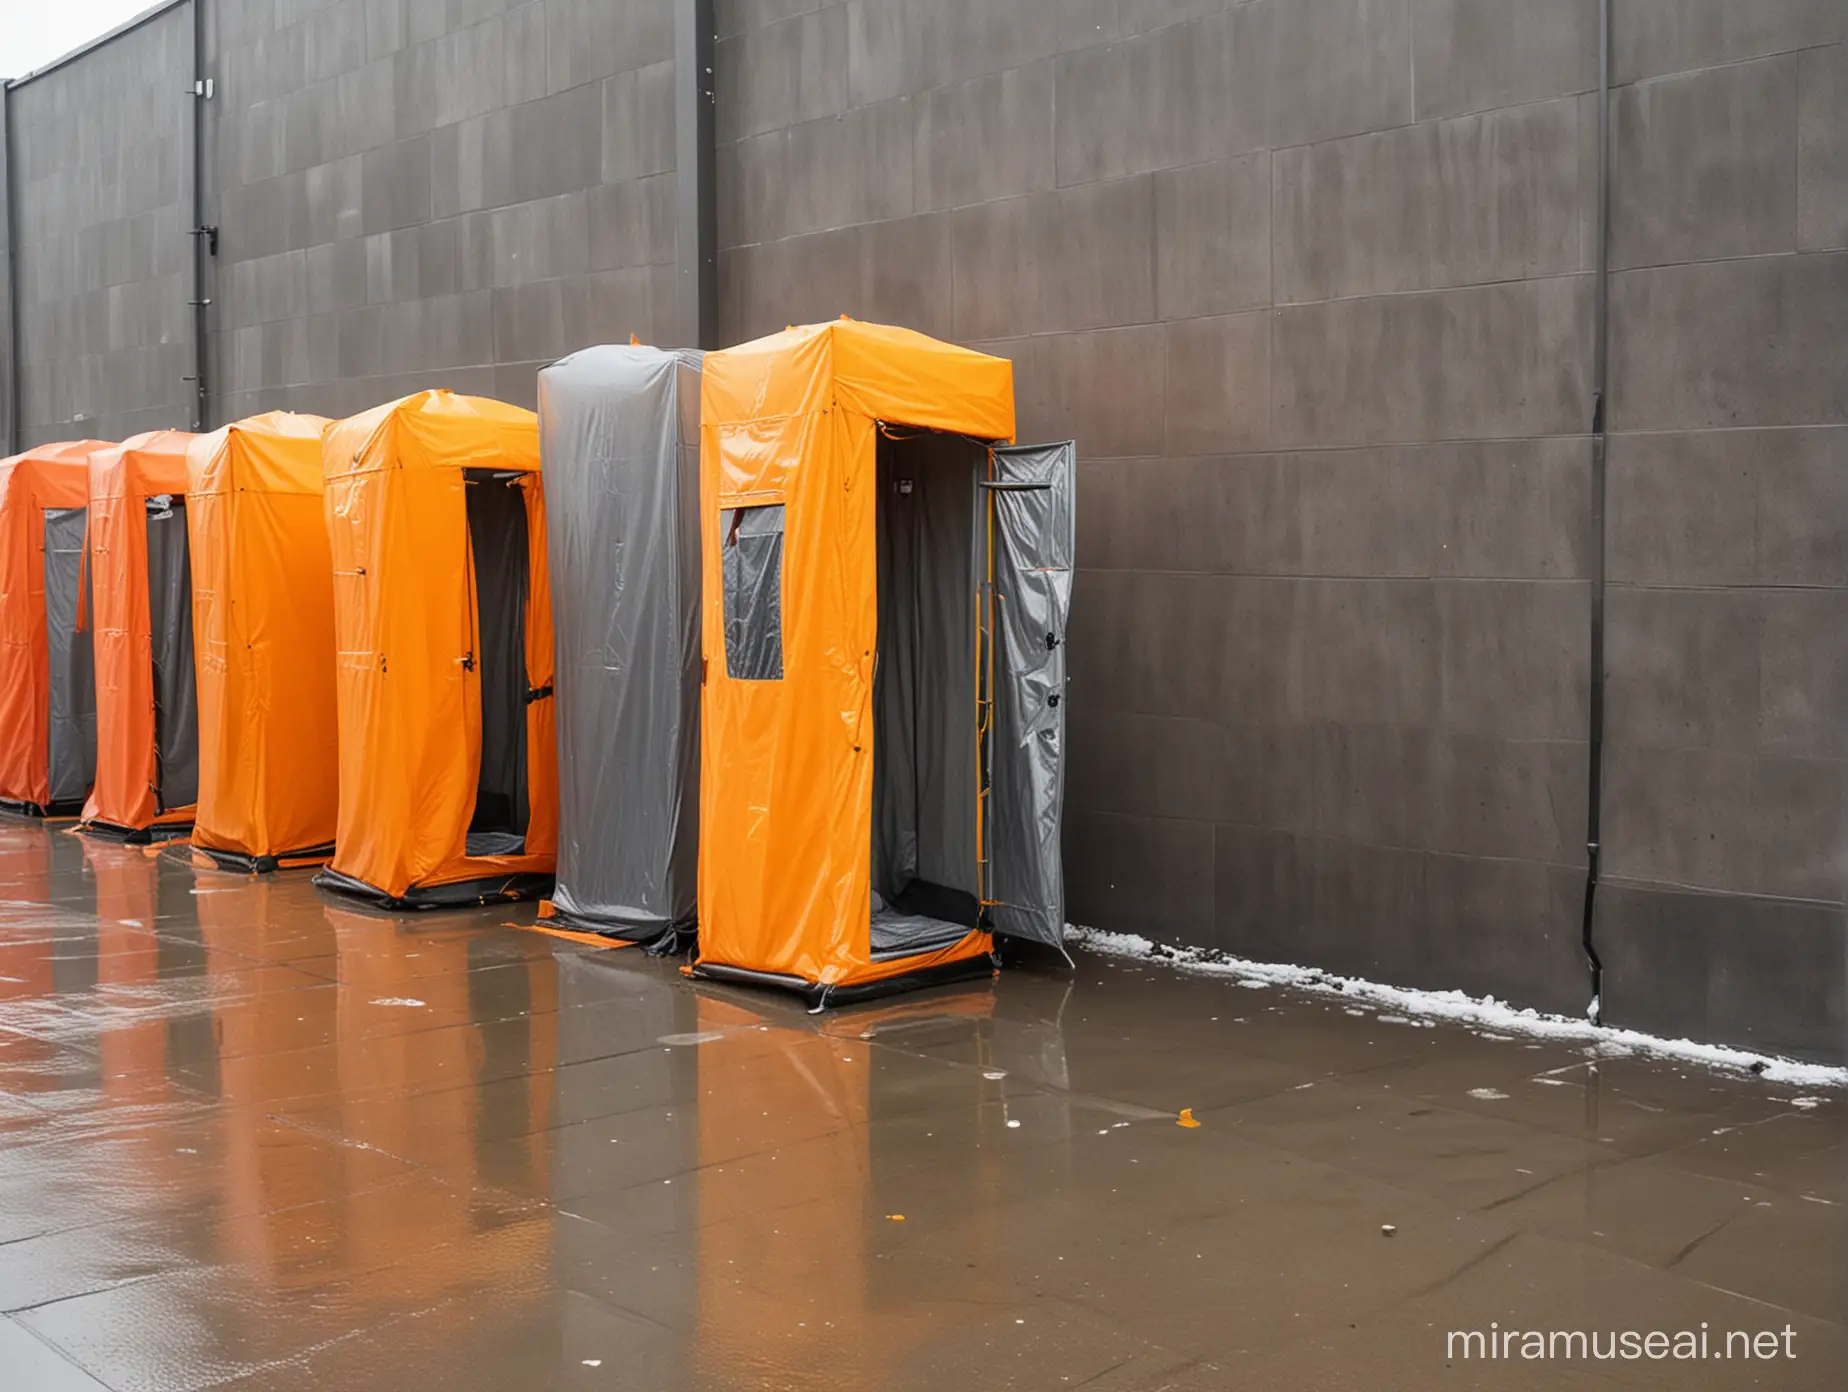 Orange and Yellow PopUp Showers for Homeless Individuals